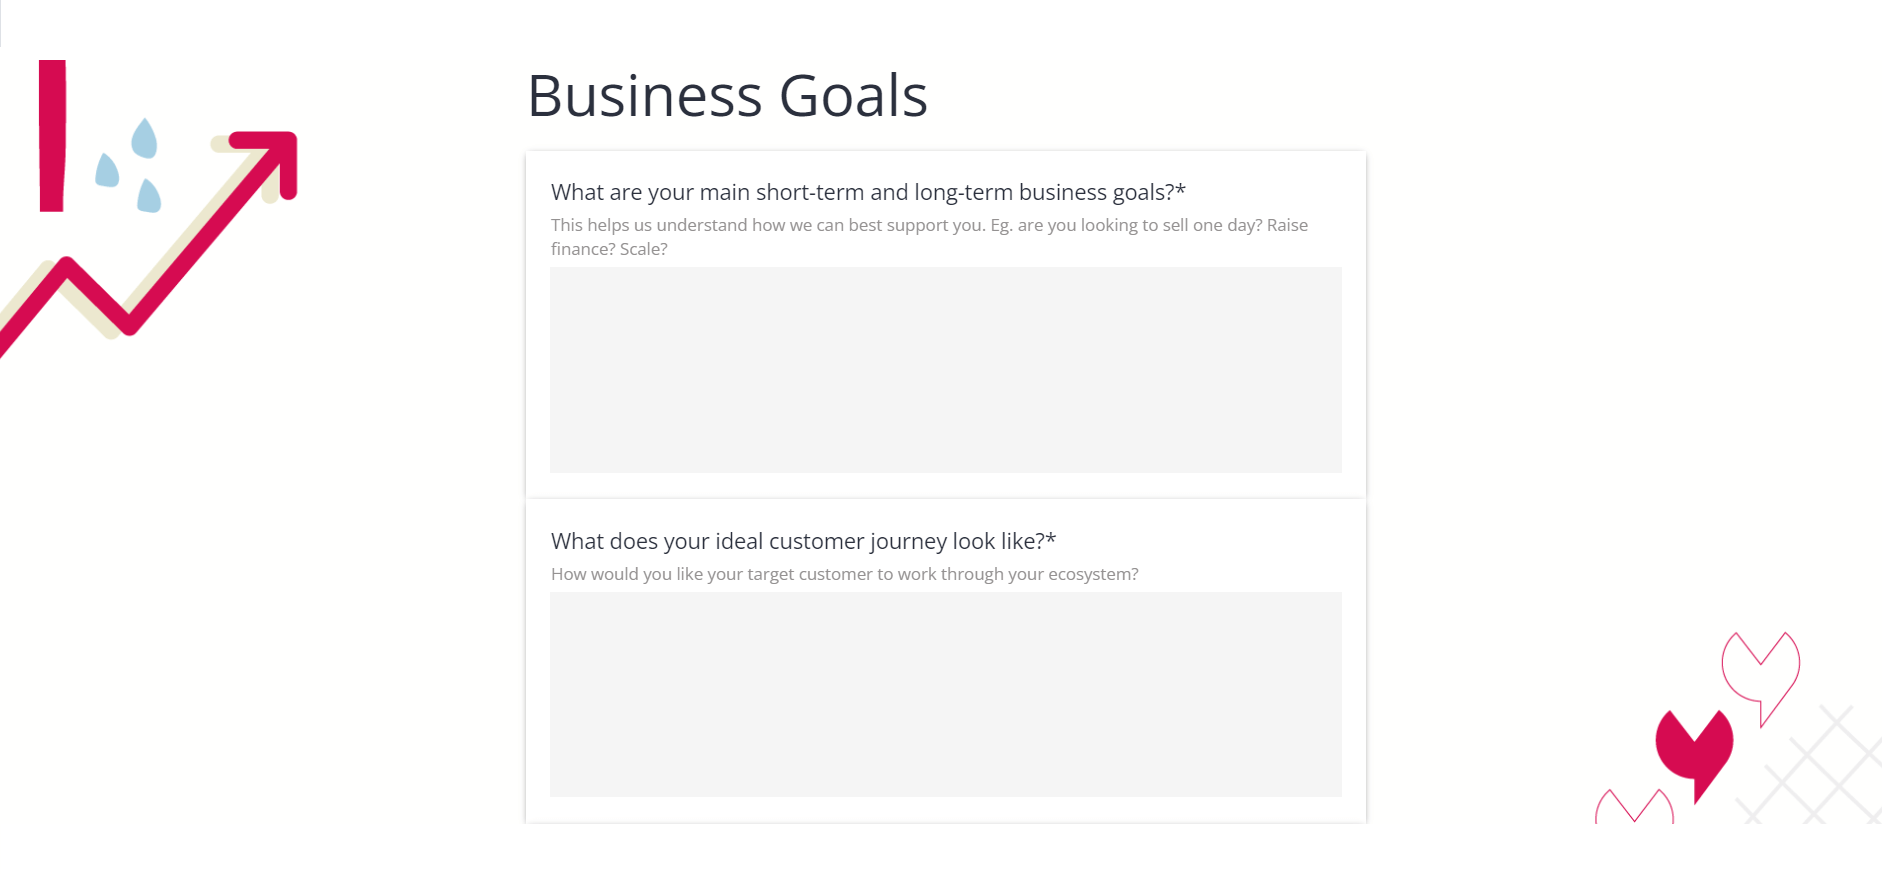 Yatter onboarding form - Business Goals section